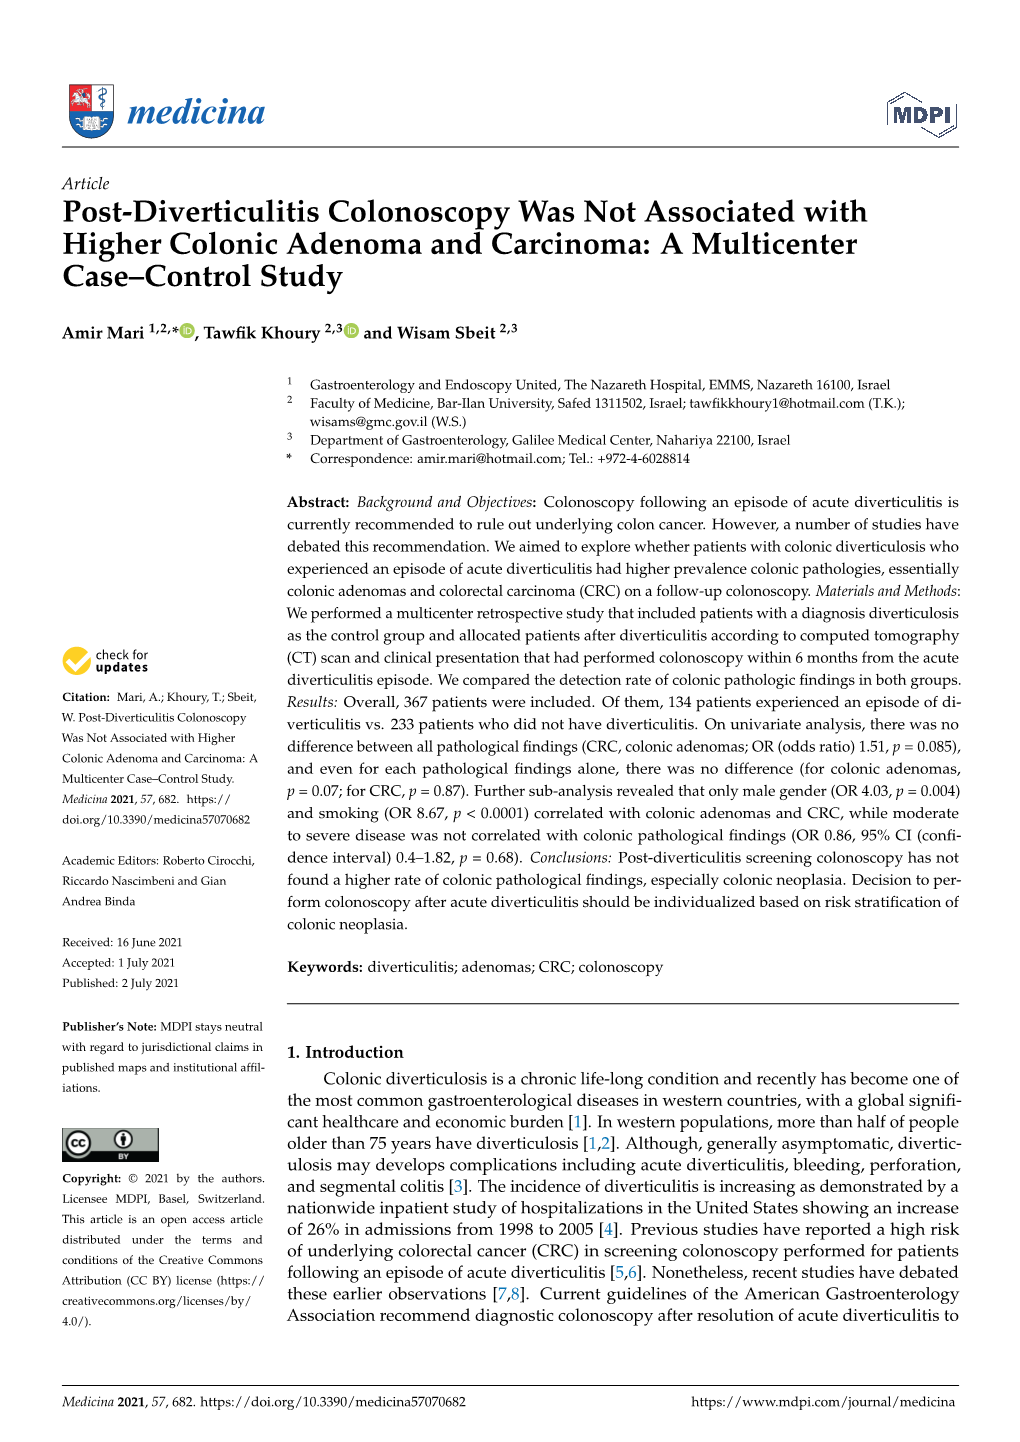 Post-Diverticulitis Colonoscopy Was Not Associated with Higher Colonic Adenoma and Carcinoma: a Multicenter Case–Control Study